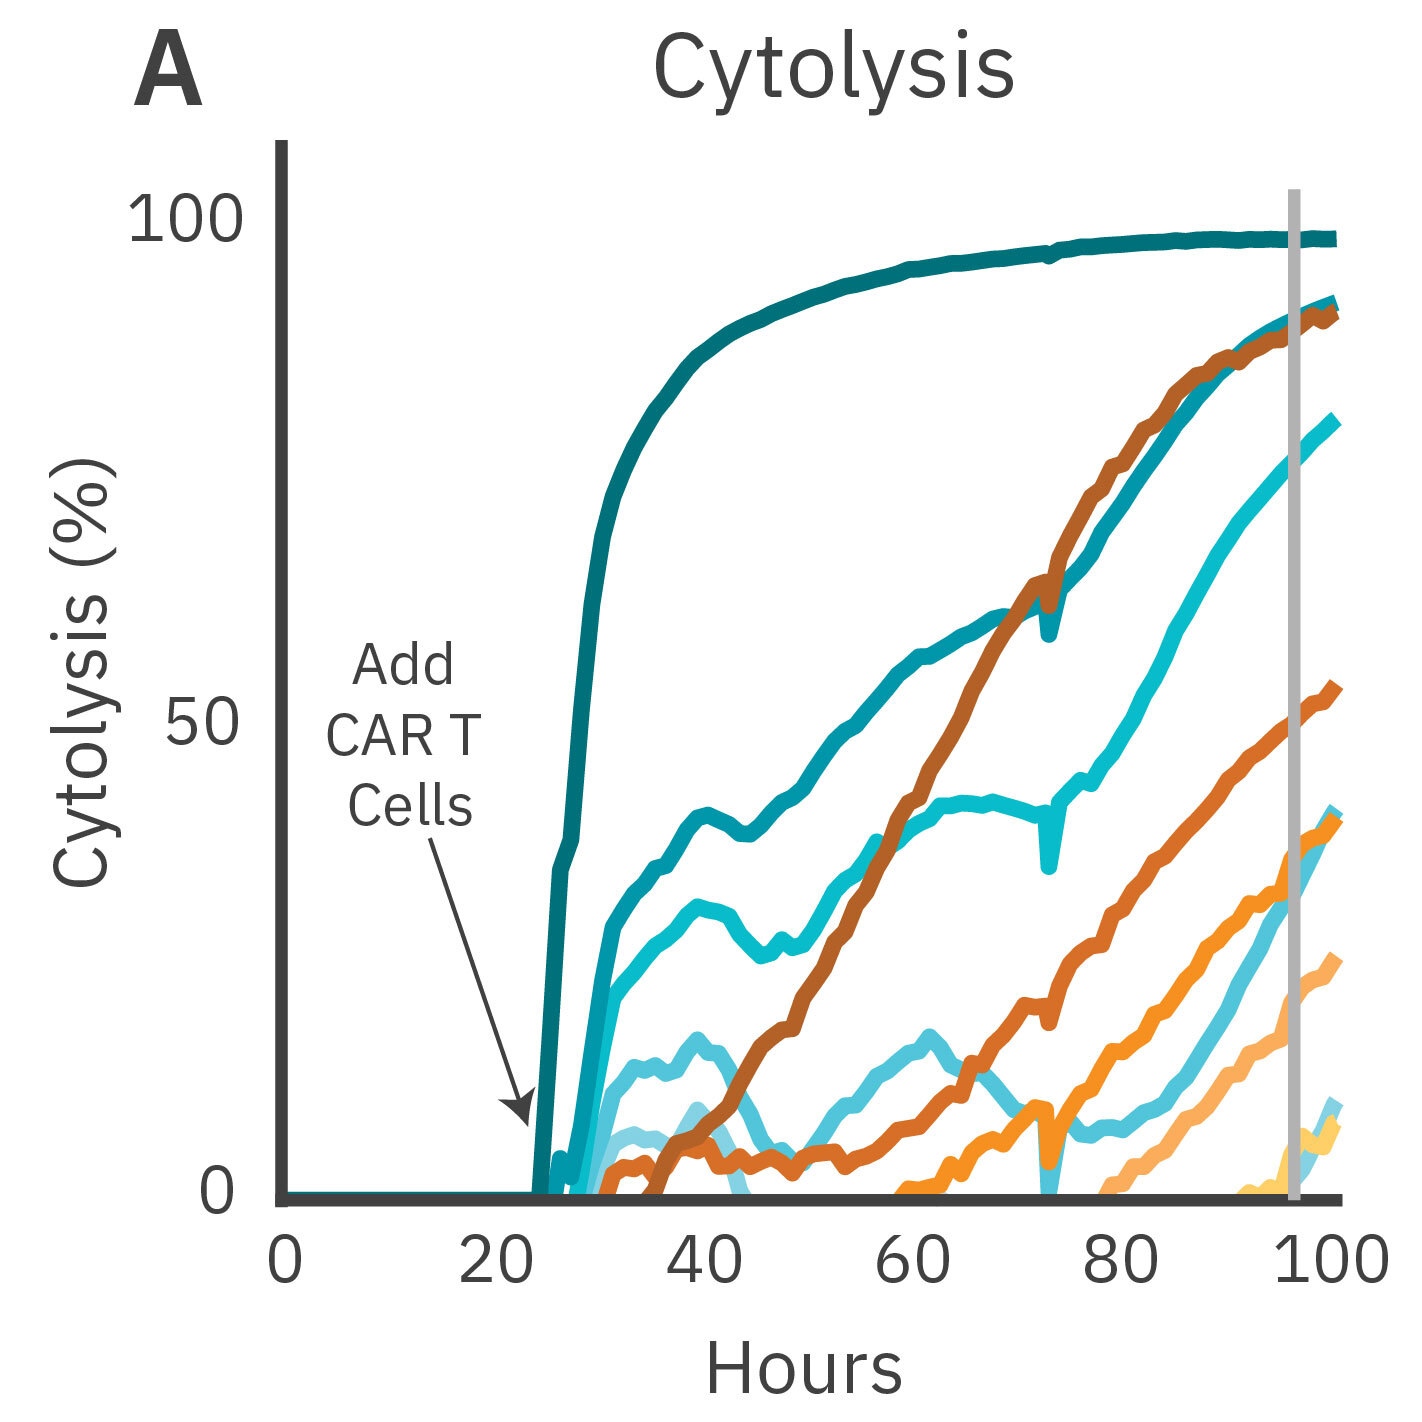 %Cytolysis of cancer spheroids with CAR T dosing